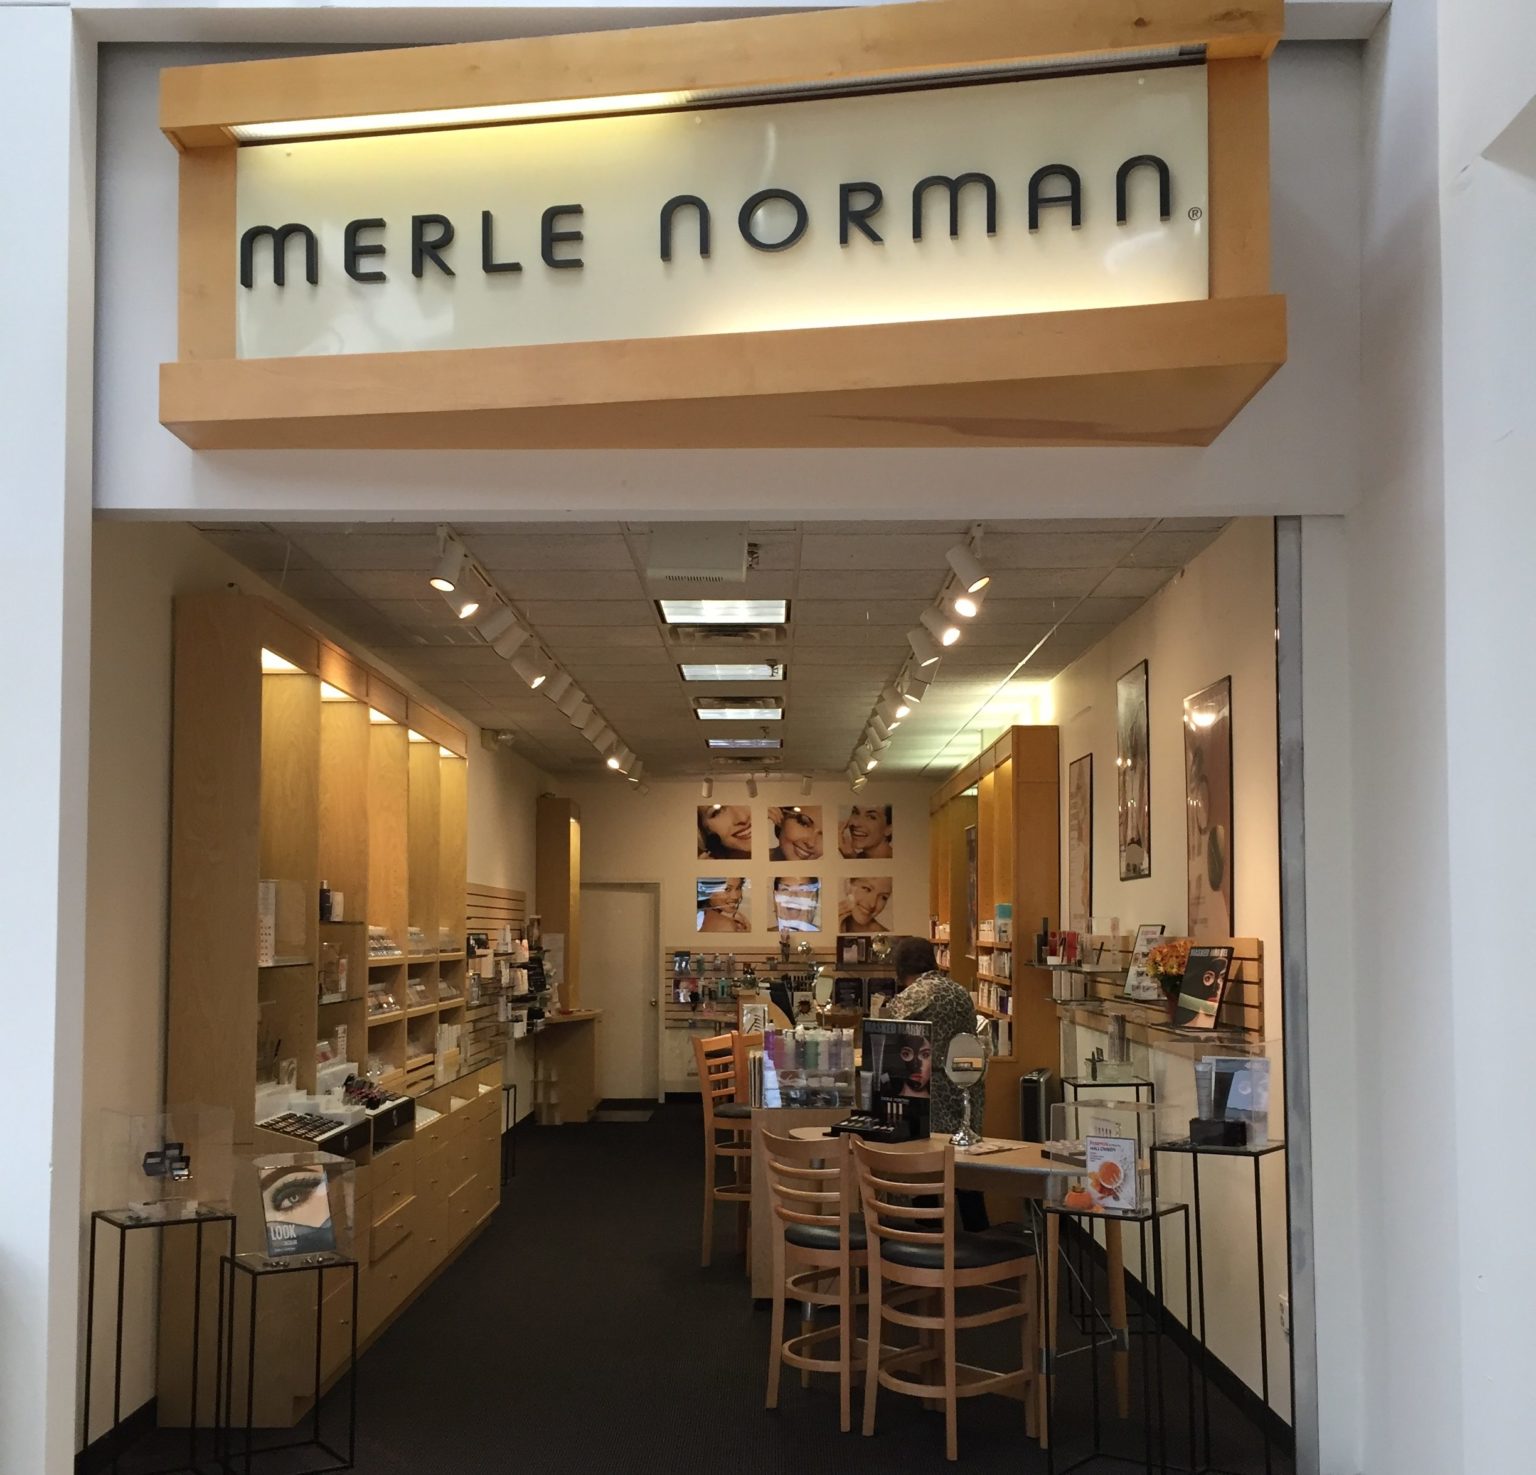 Merle Norman Franchisee Celebrated 39th Year Anniversary In Their